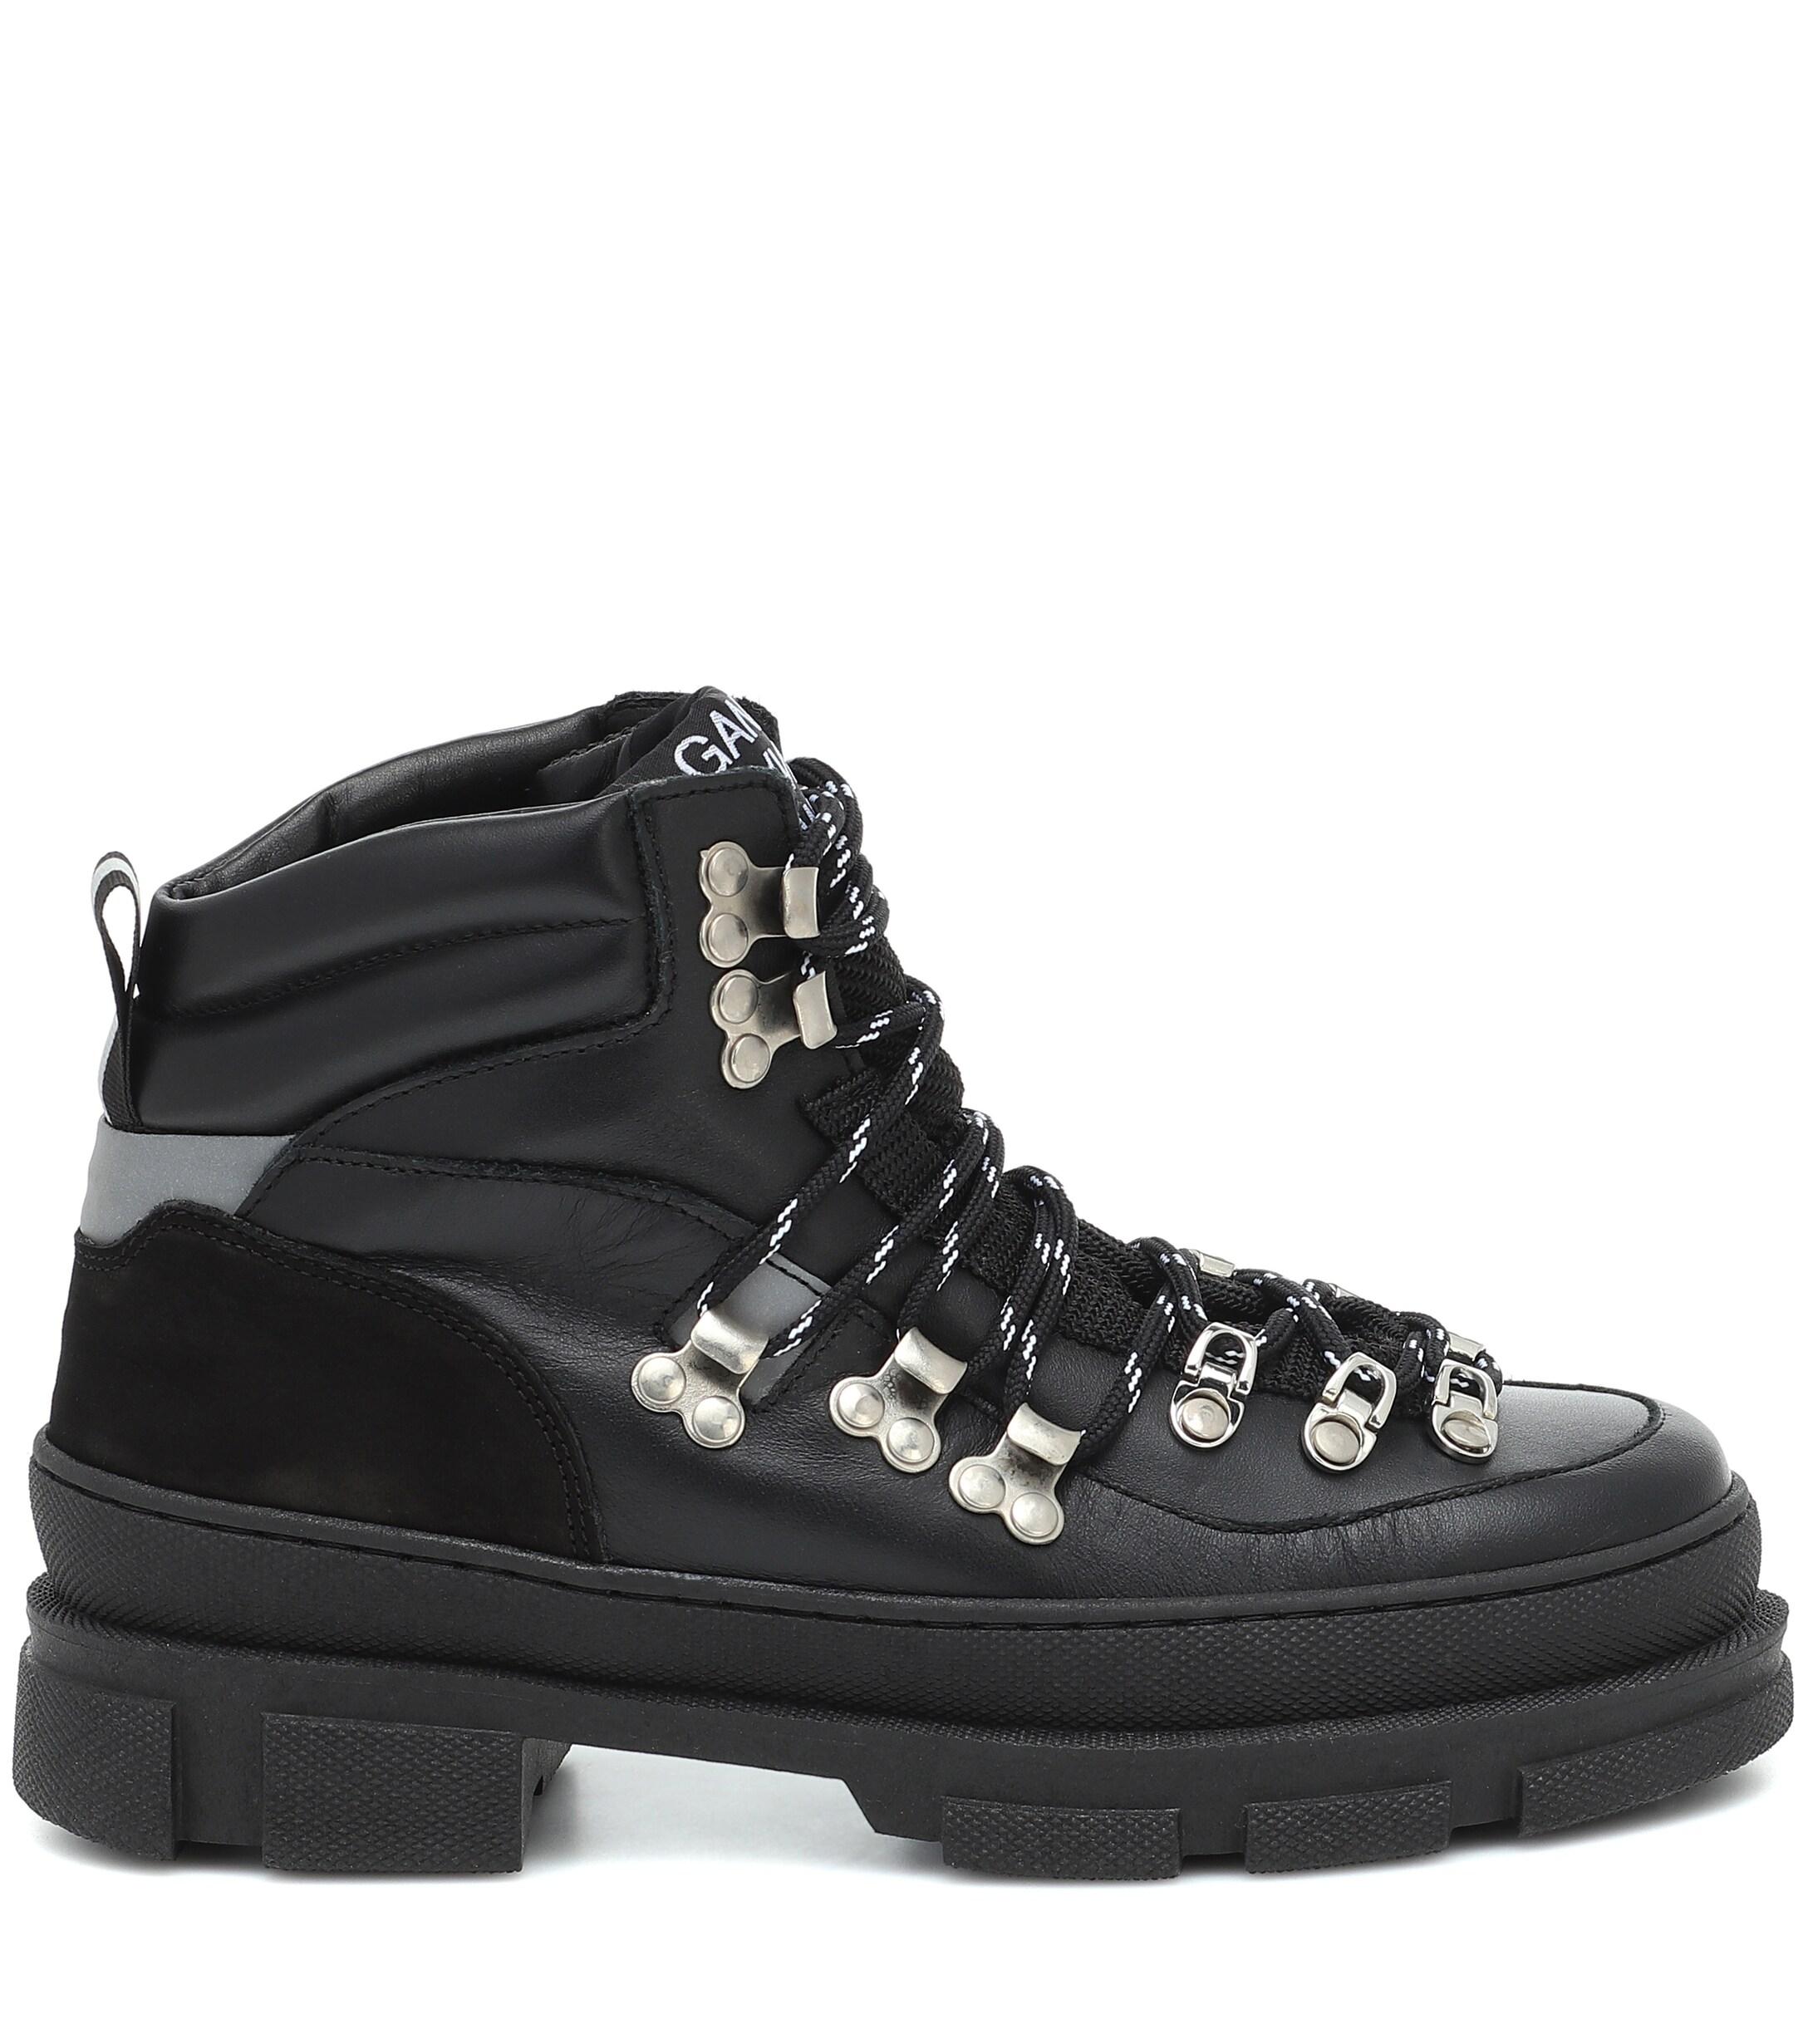 Ganni Sporty Hiking Leather Ankle Boots in Black - Lyst